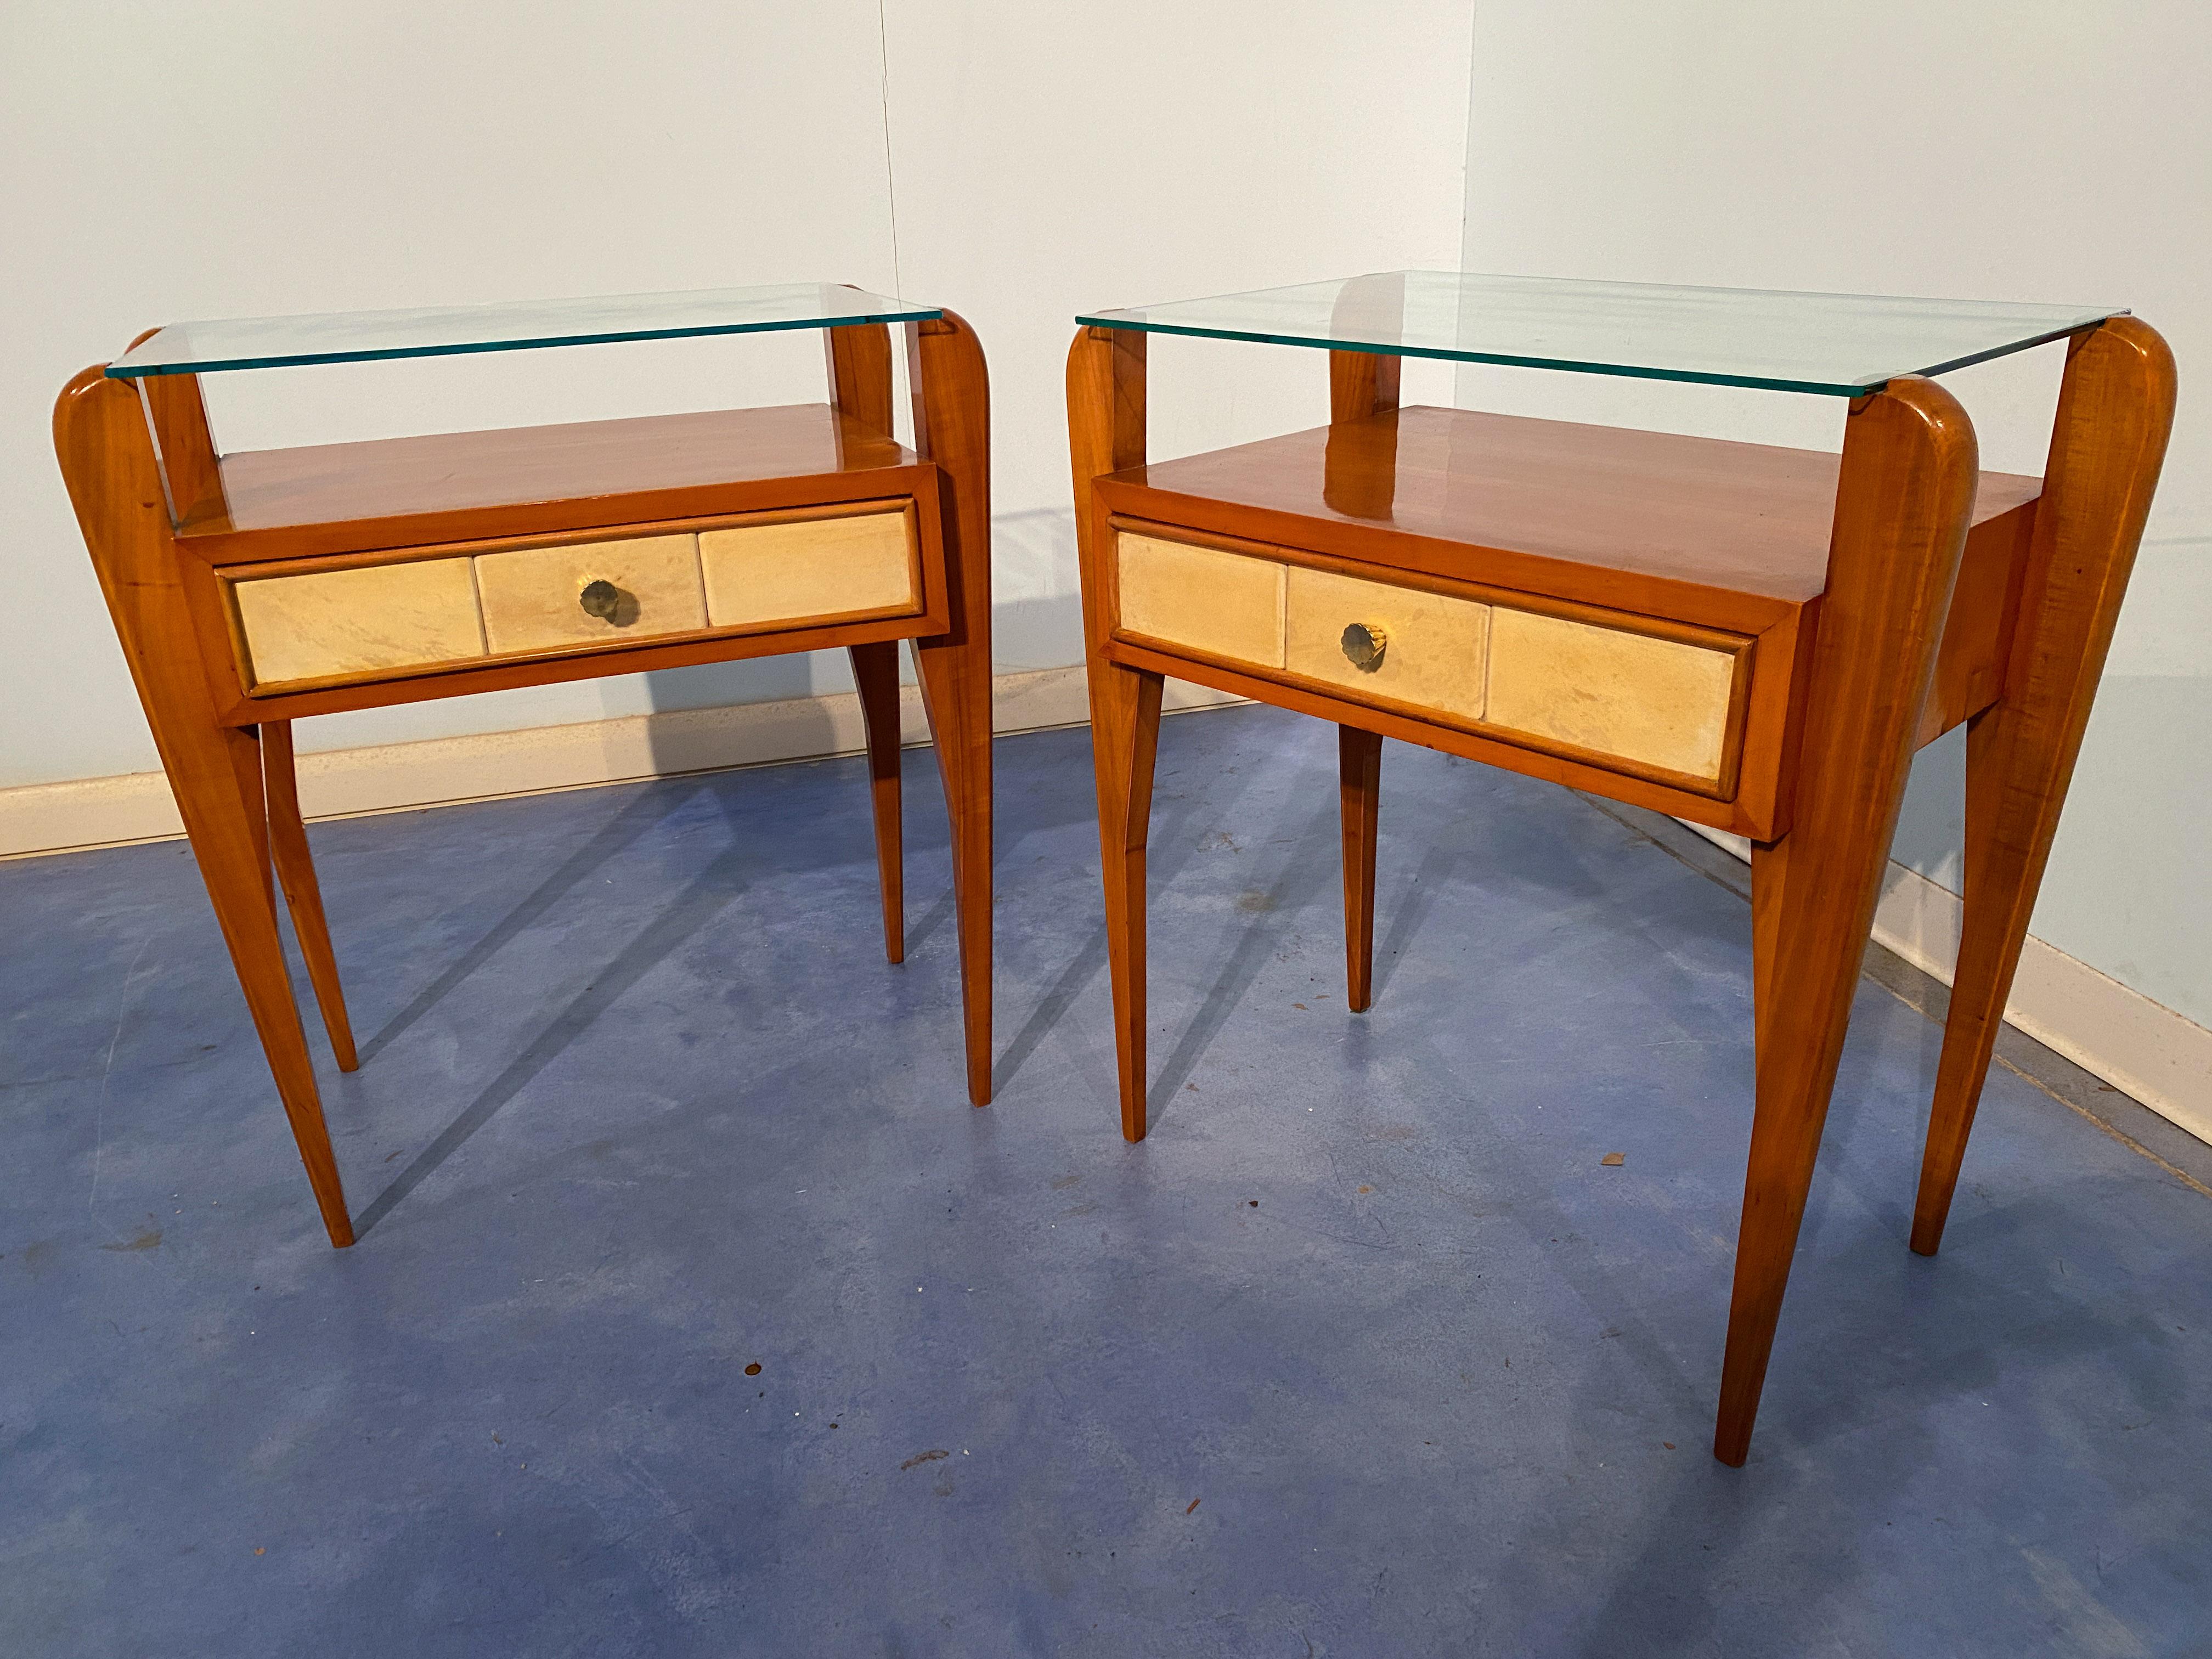 Brass Italian Mid-Century Parchment Bedside or Nightstands by Osvaldo Borsani, 1950 For Sale